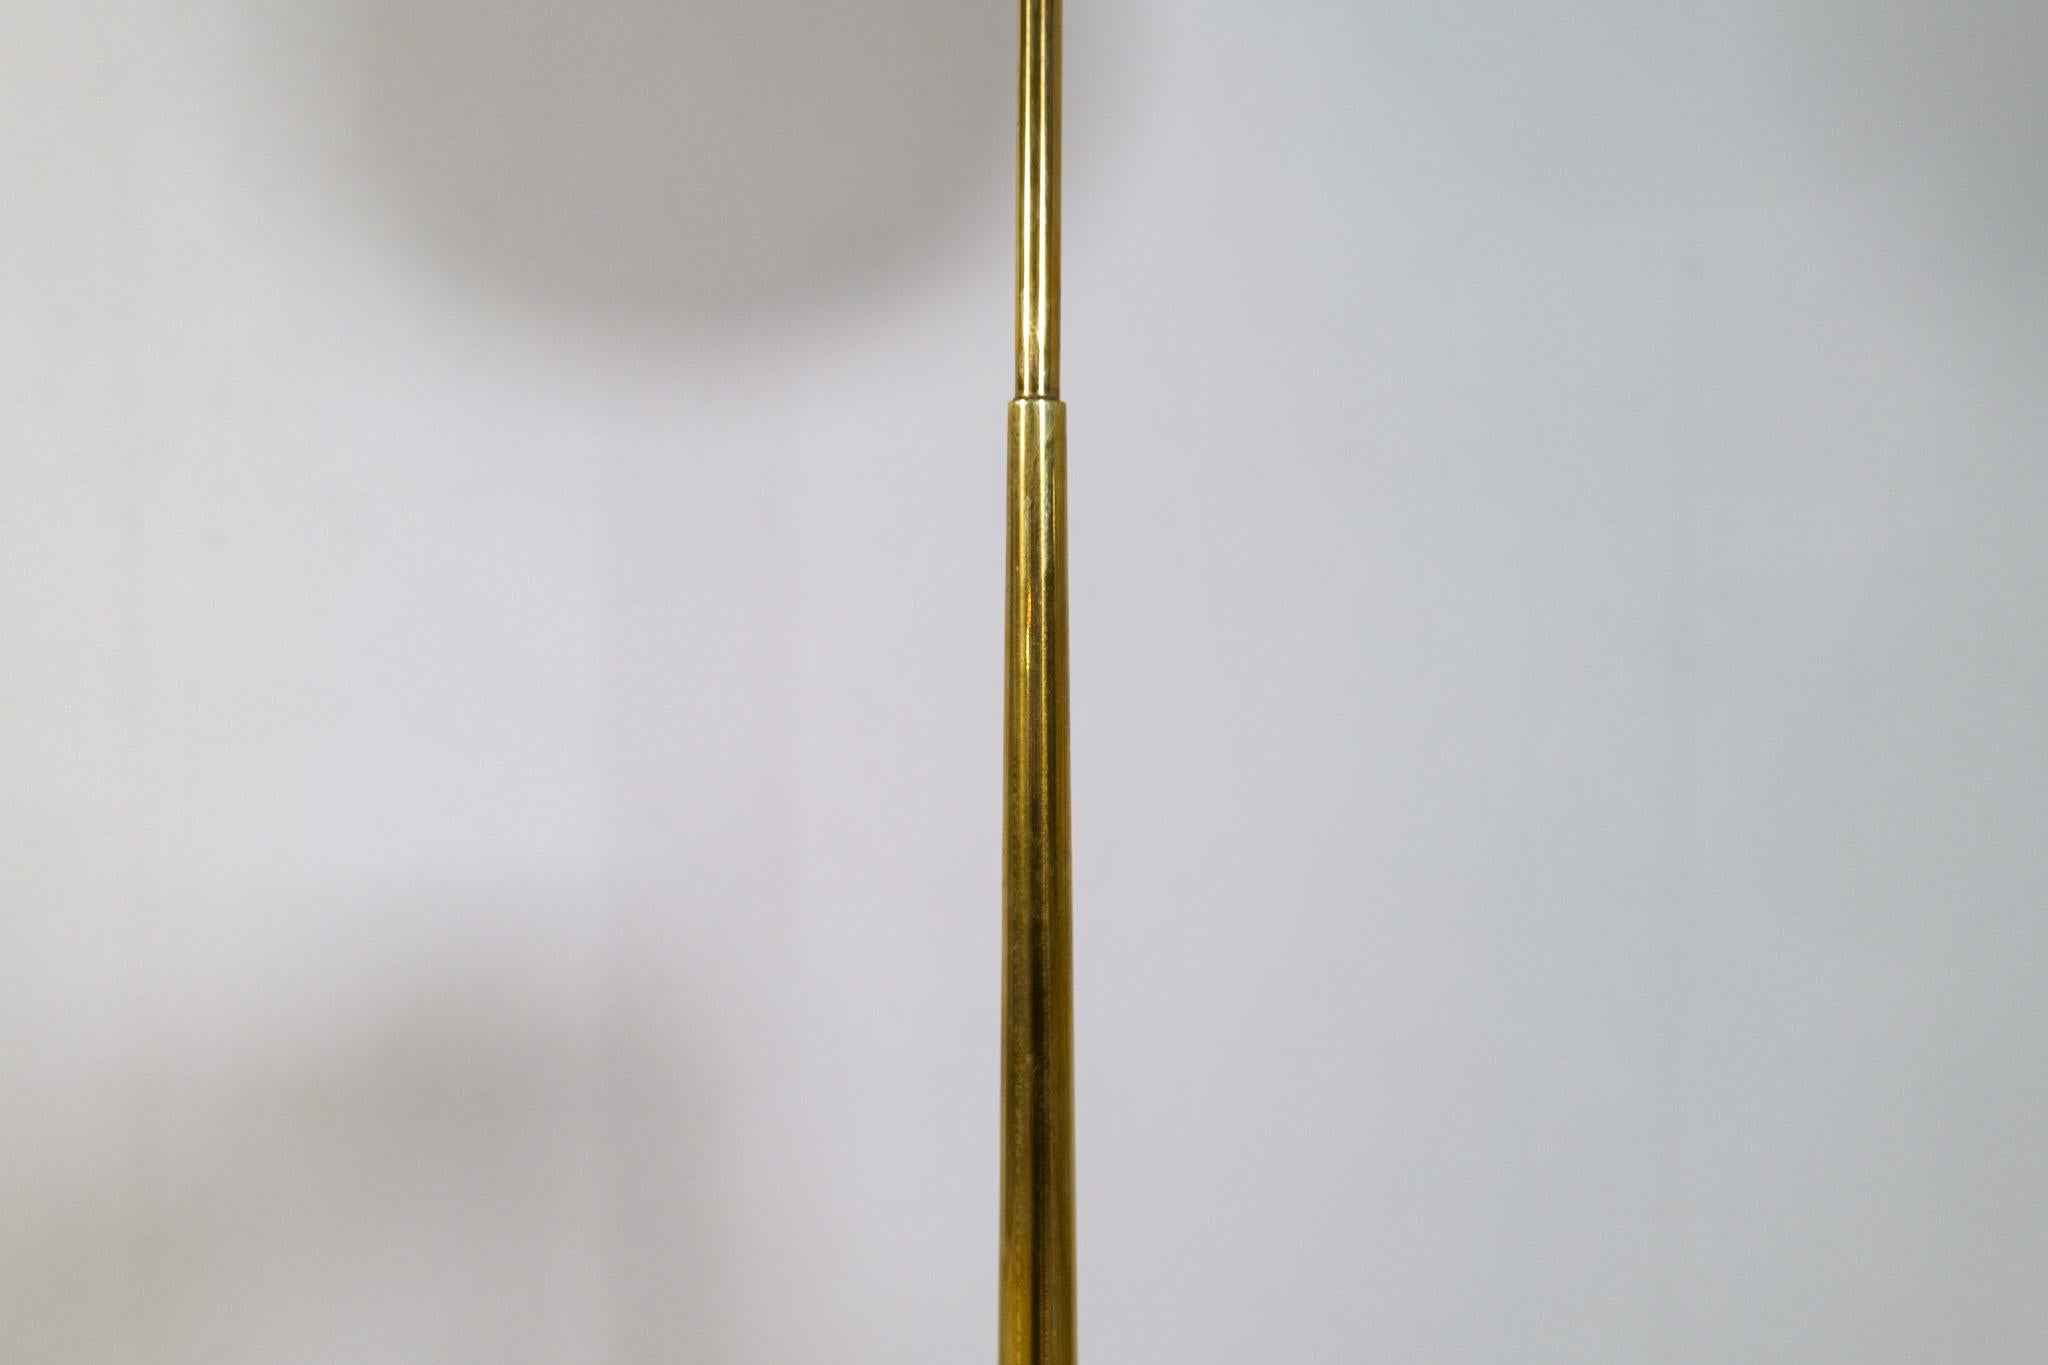 Midcentury Modern ASEA Brass Floor Lamp with Round Cotton Shade, Sweden, 1960s For Sale 3